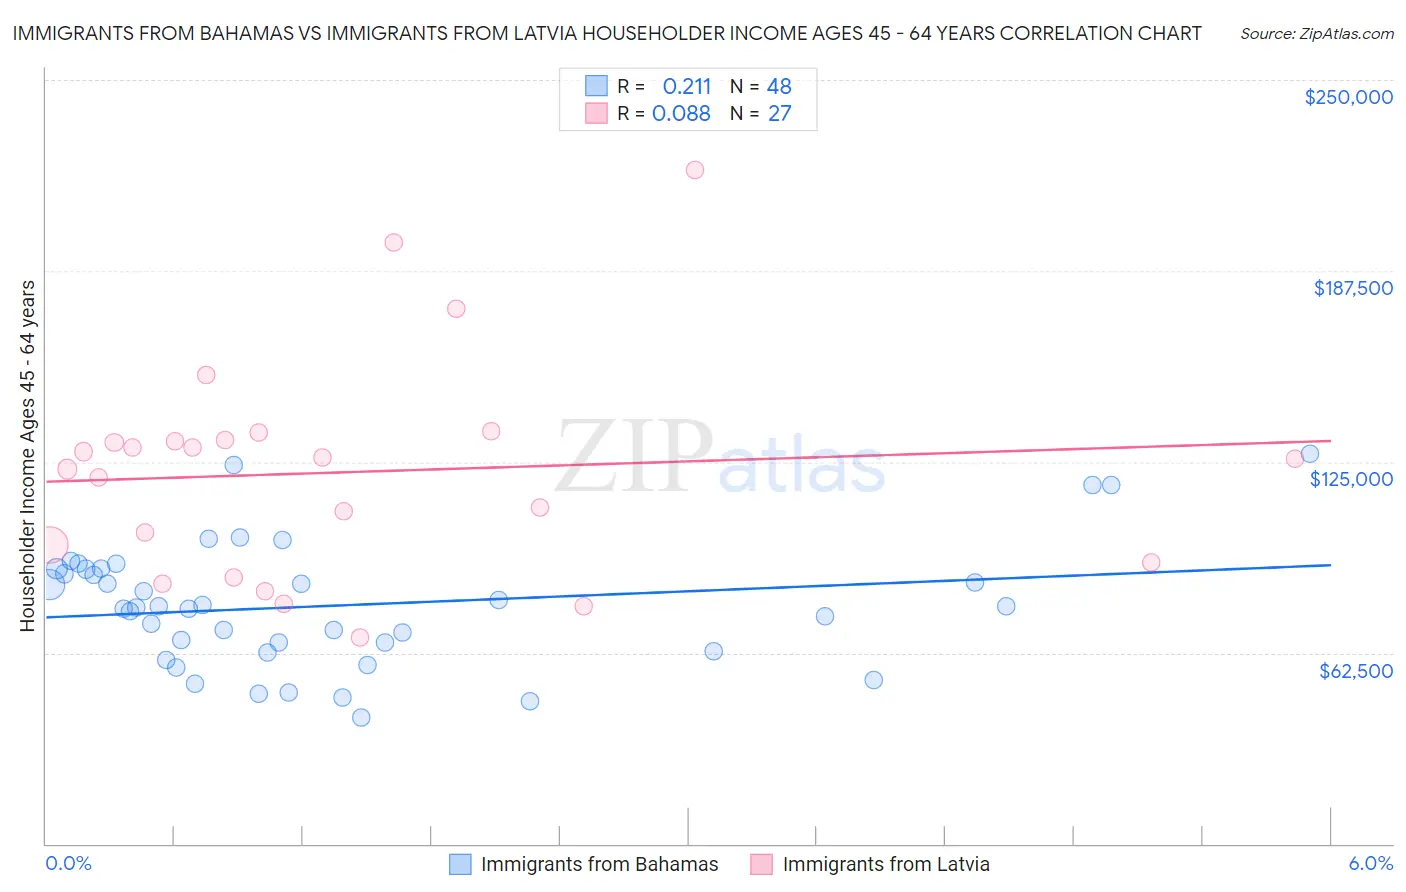 Immigrants from Bahamas vs Immigrants from Latvia Householder Income Ages 45 - 64 years